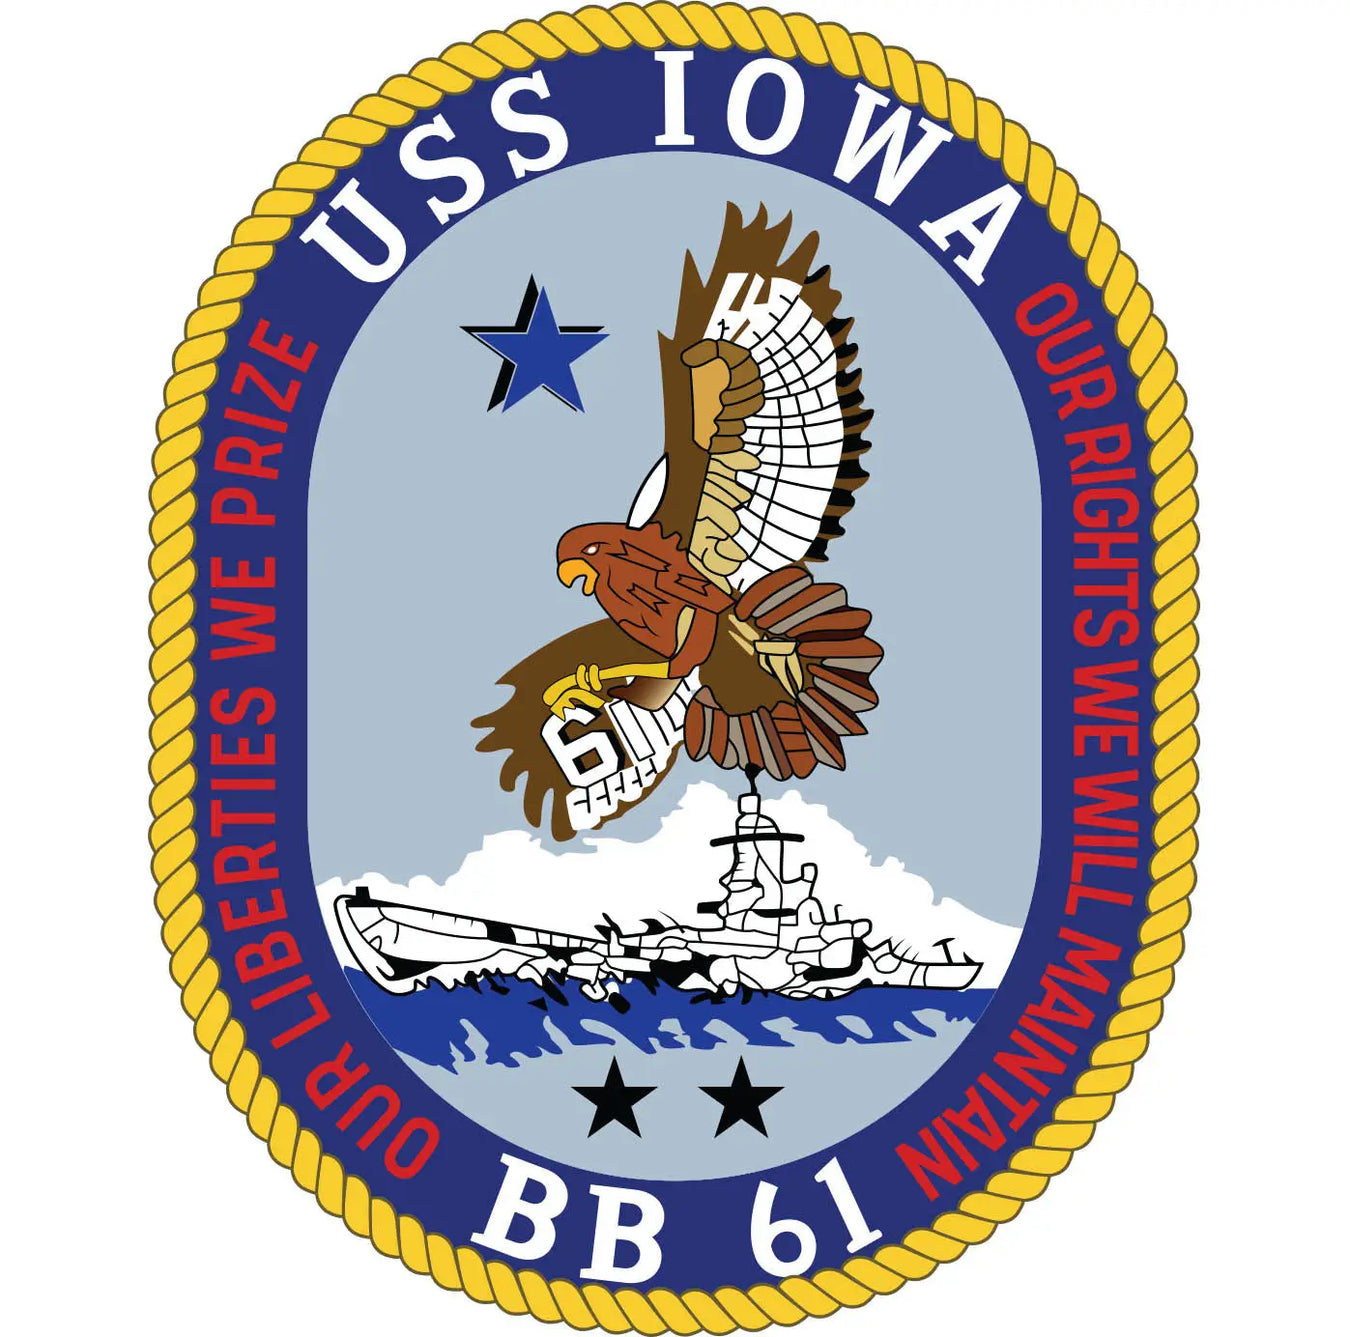 USS Iowa (BB-61) Merchandise - Shop T-Shirts, hoodies, patches, pins, flags, decals, hats and more.